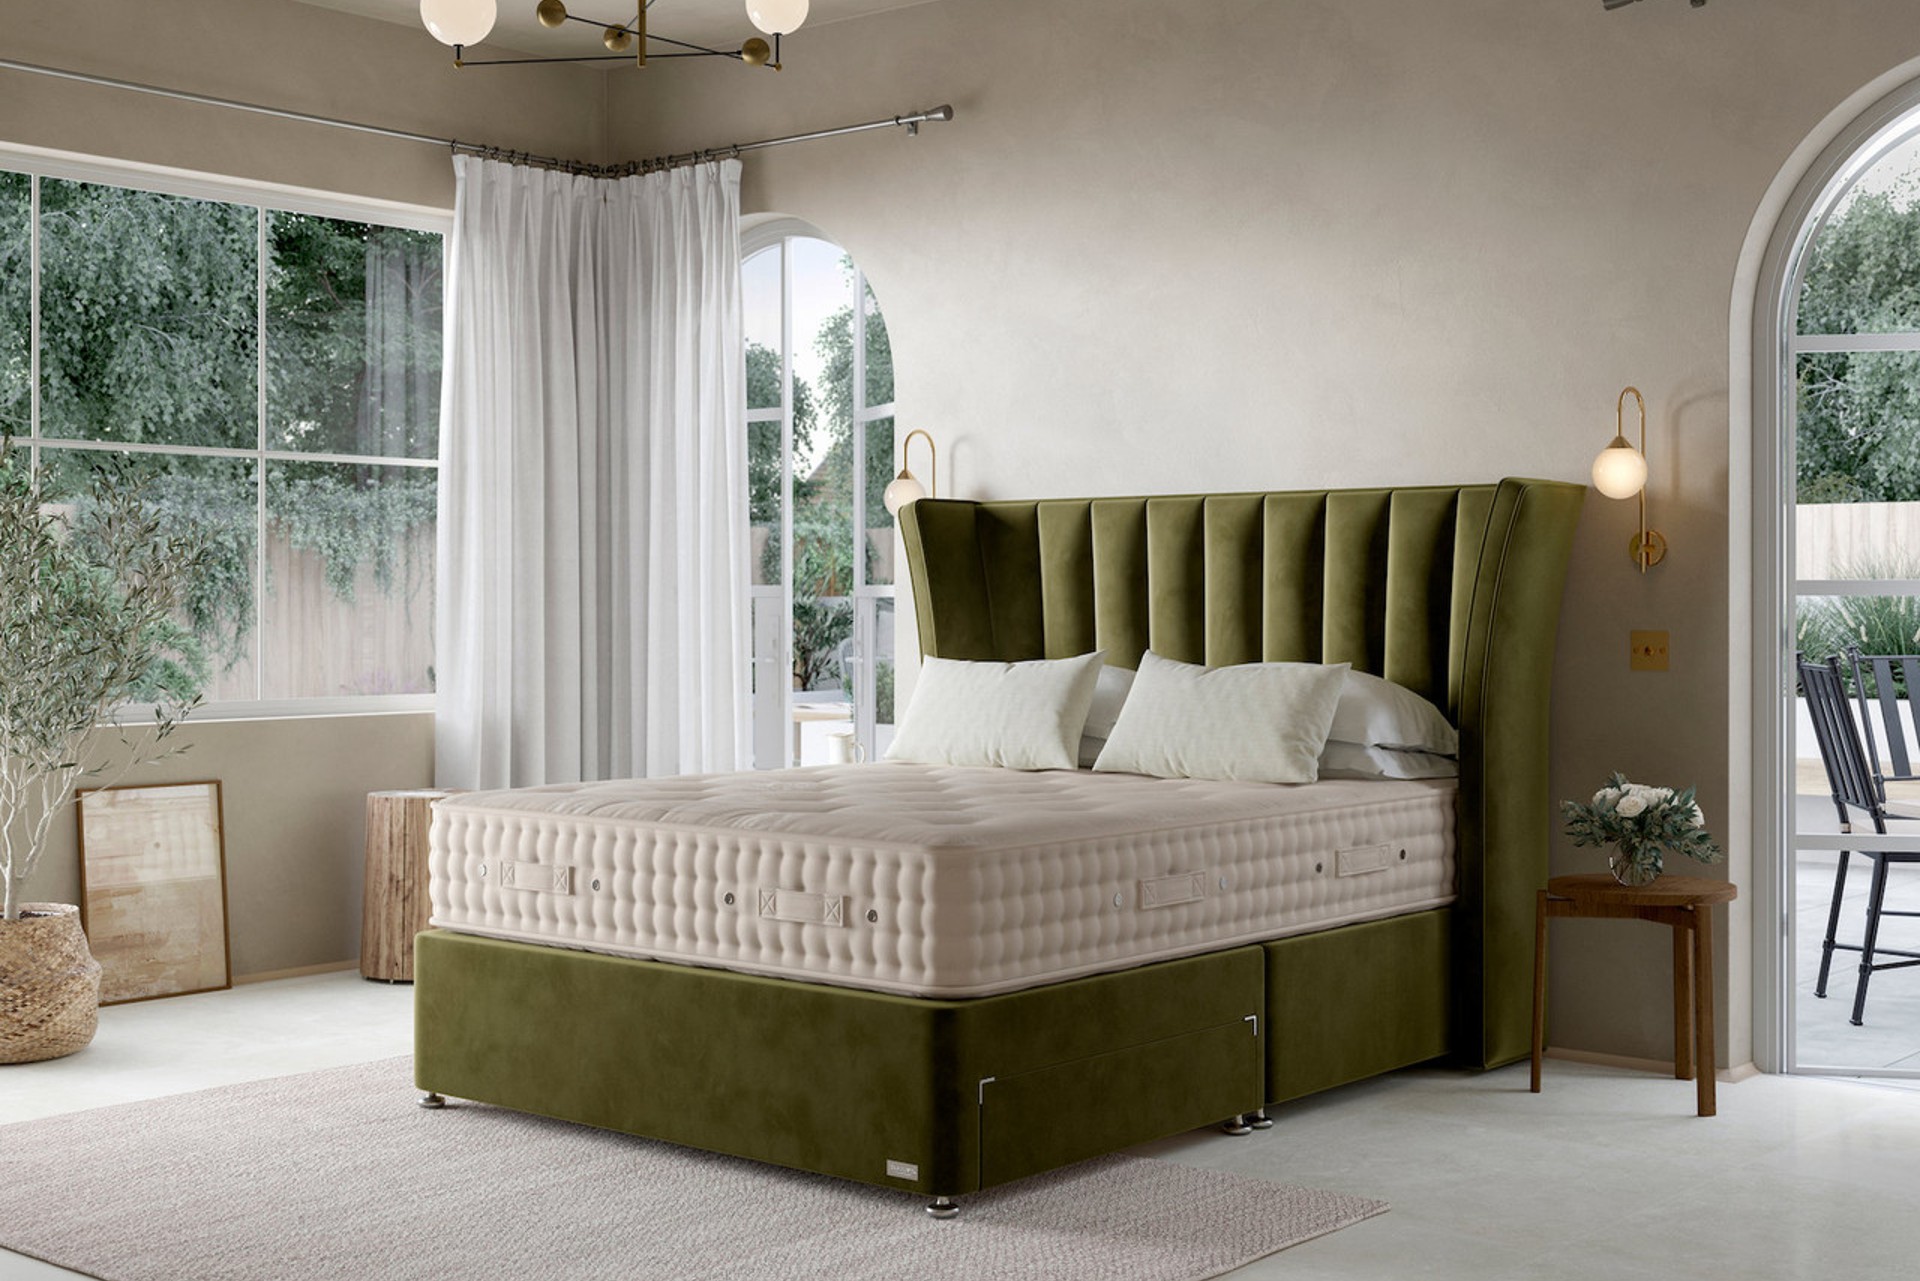 Hypnos Luxurious Earth 05 Divan Bed Set On Castors in Dutch green with wrap around headboard.